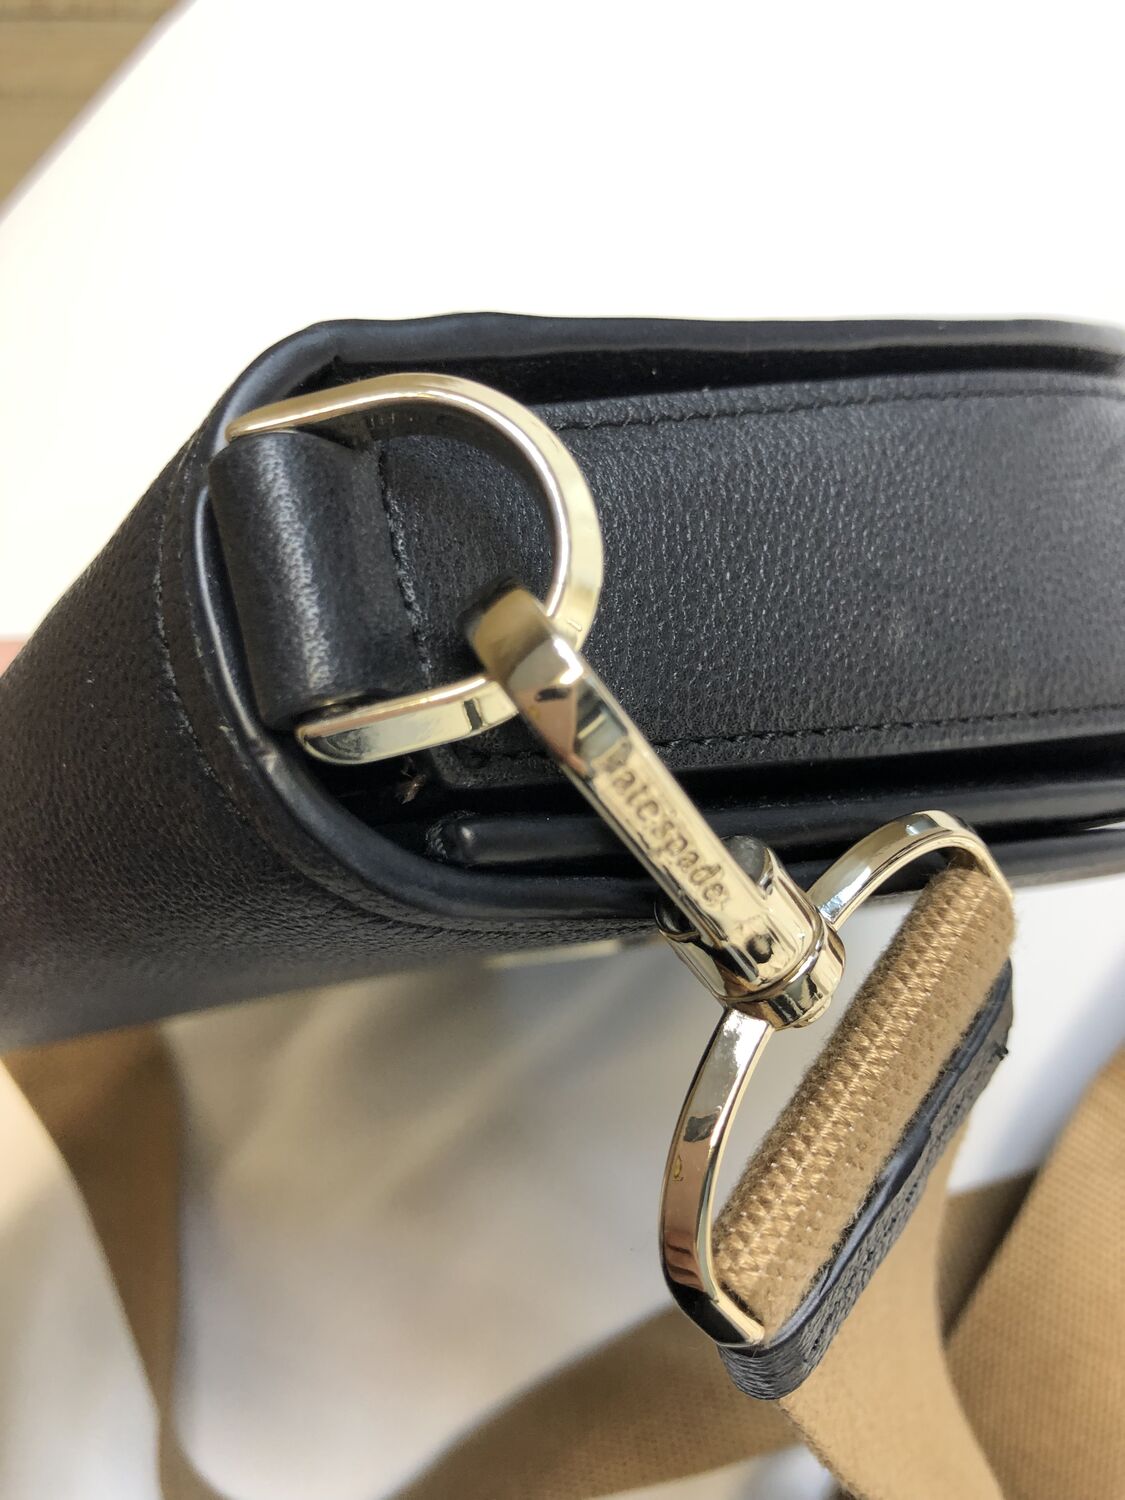 Leather Cross-body bag Kate Spade, buy pre-owned at 100 EUR